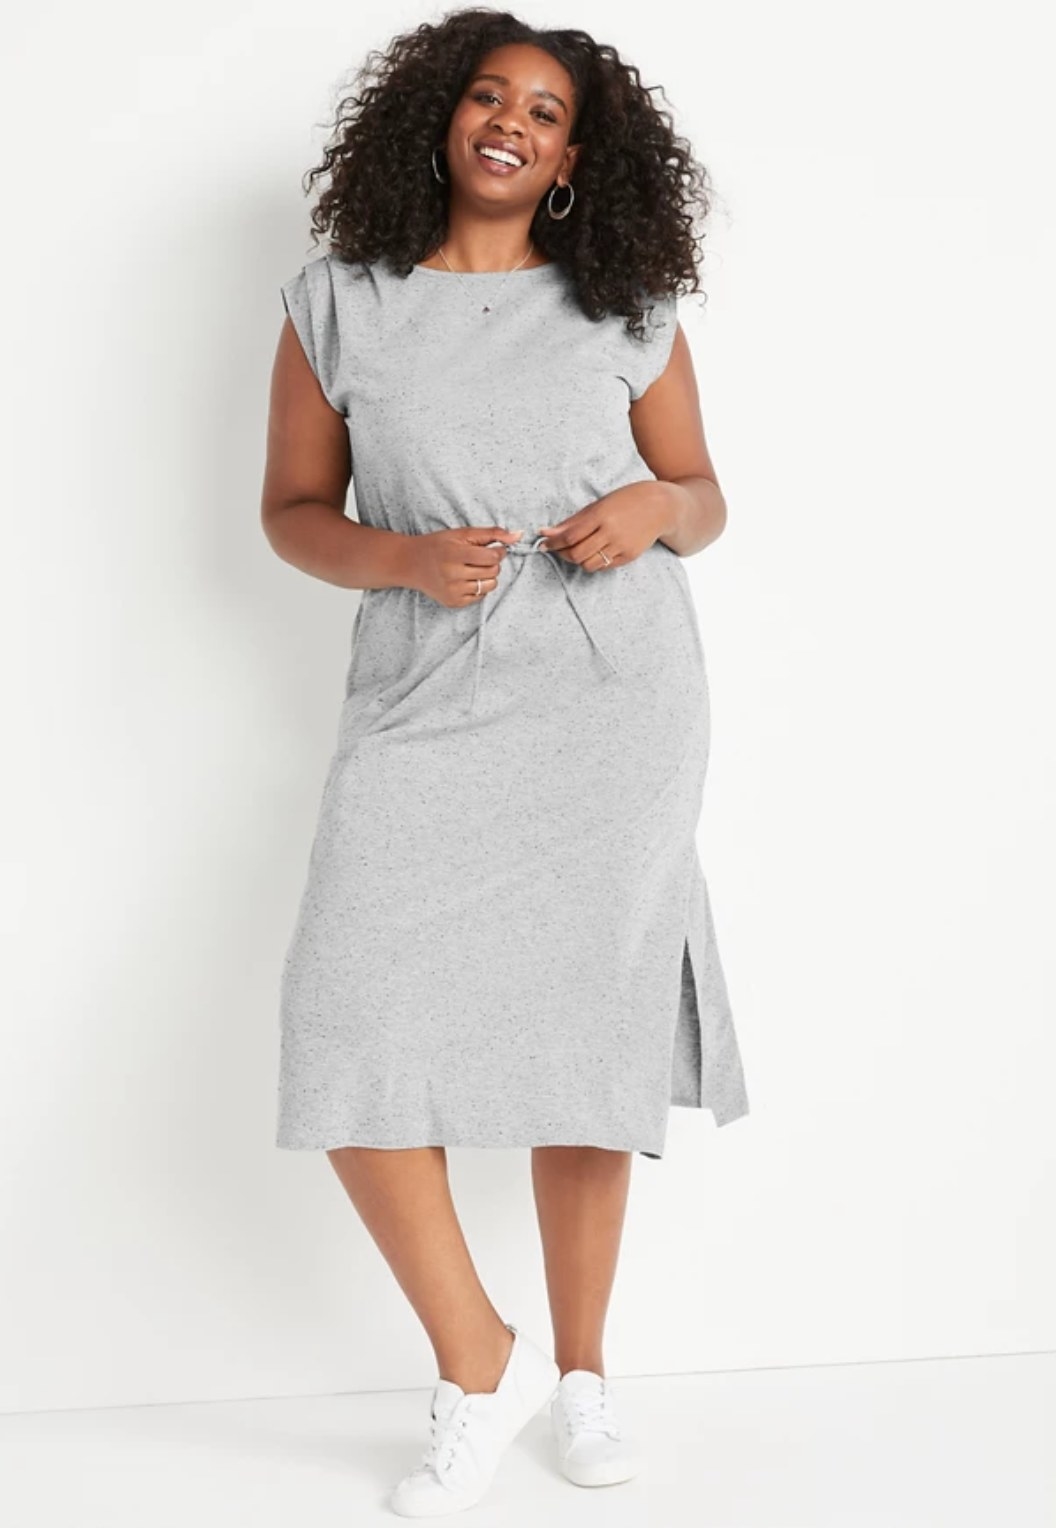 model wearing the light gray dress with white shoes